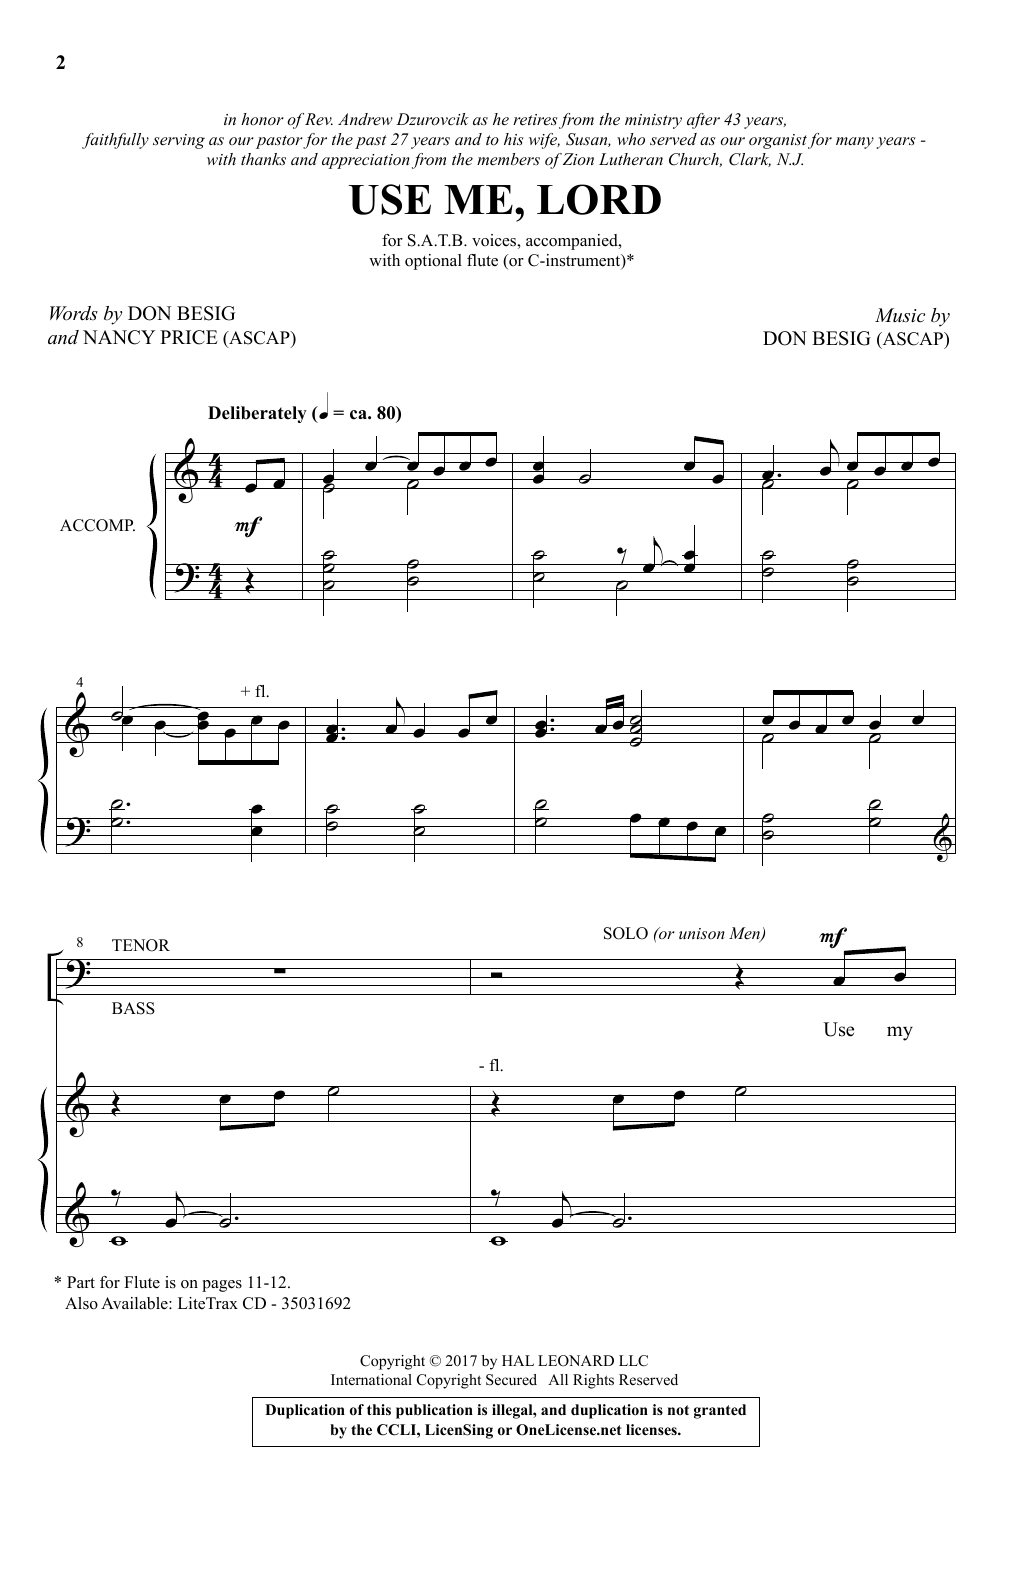 Download Don Besig and Nancy Price Use Me, Lord Sheet Music